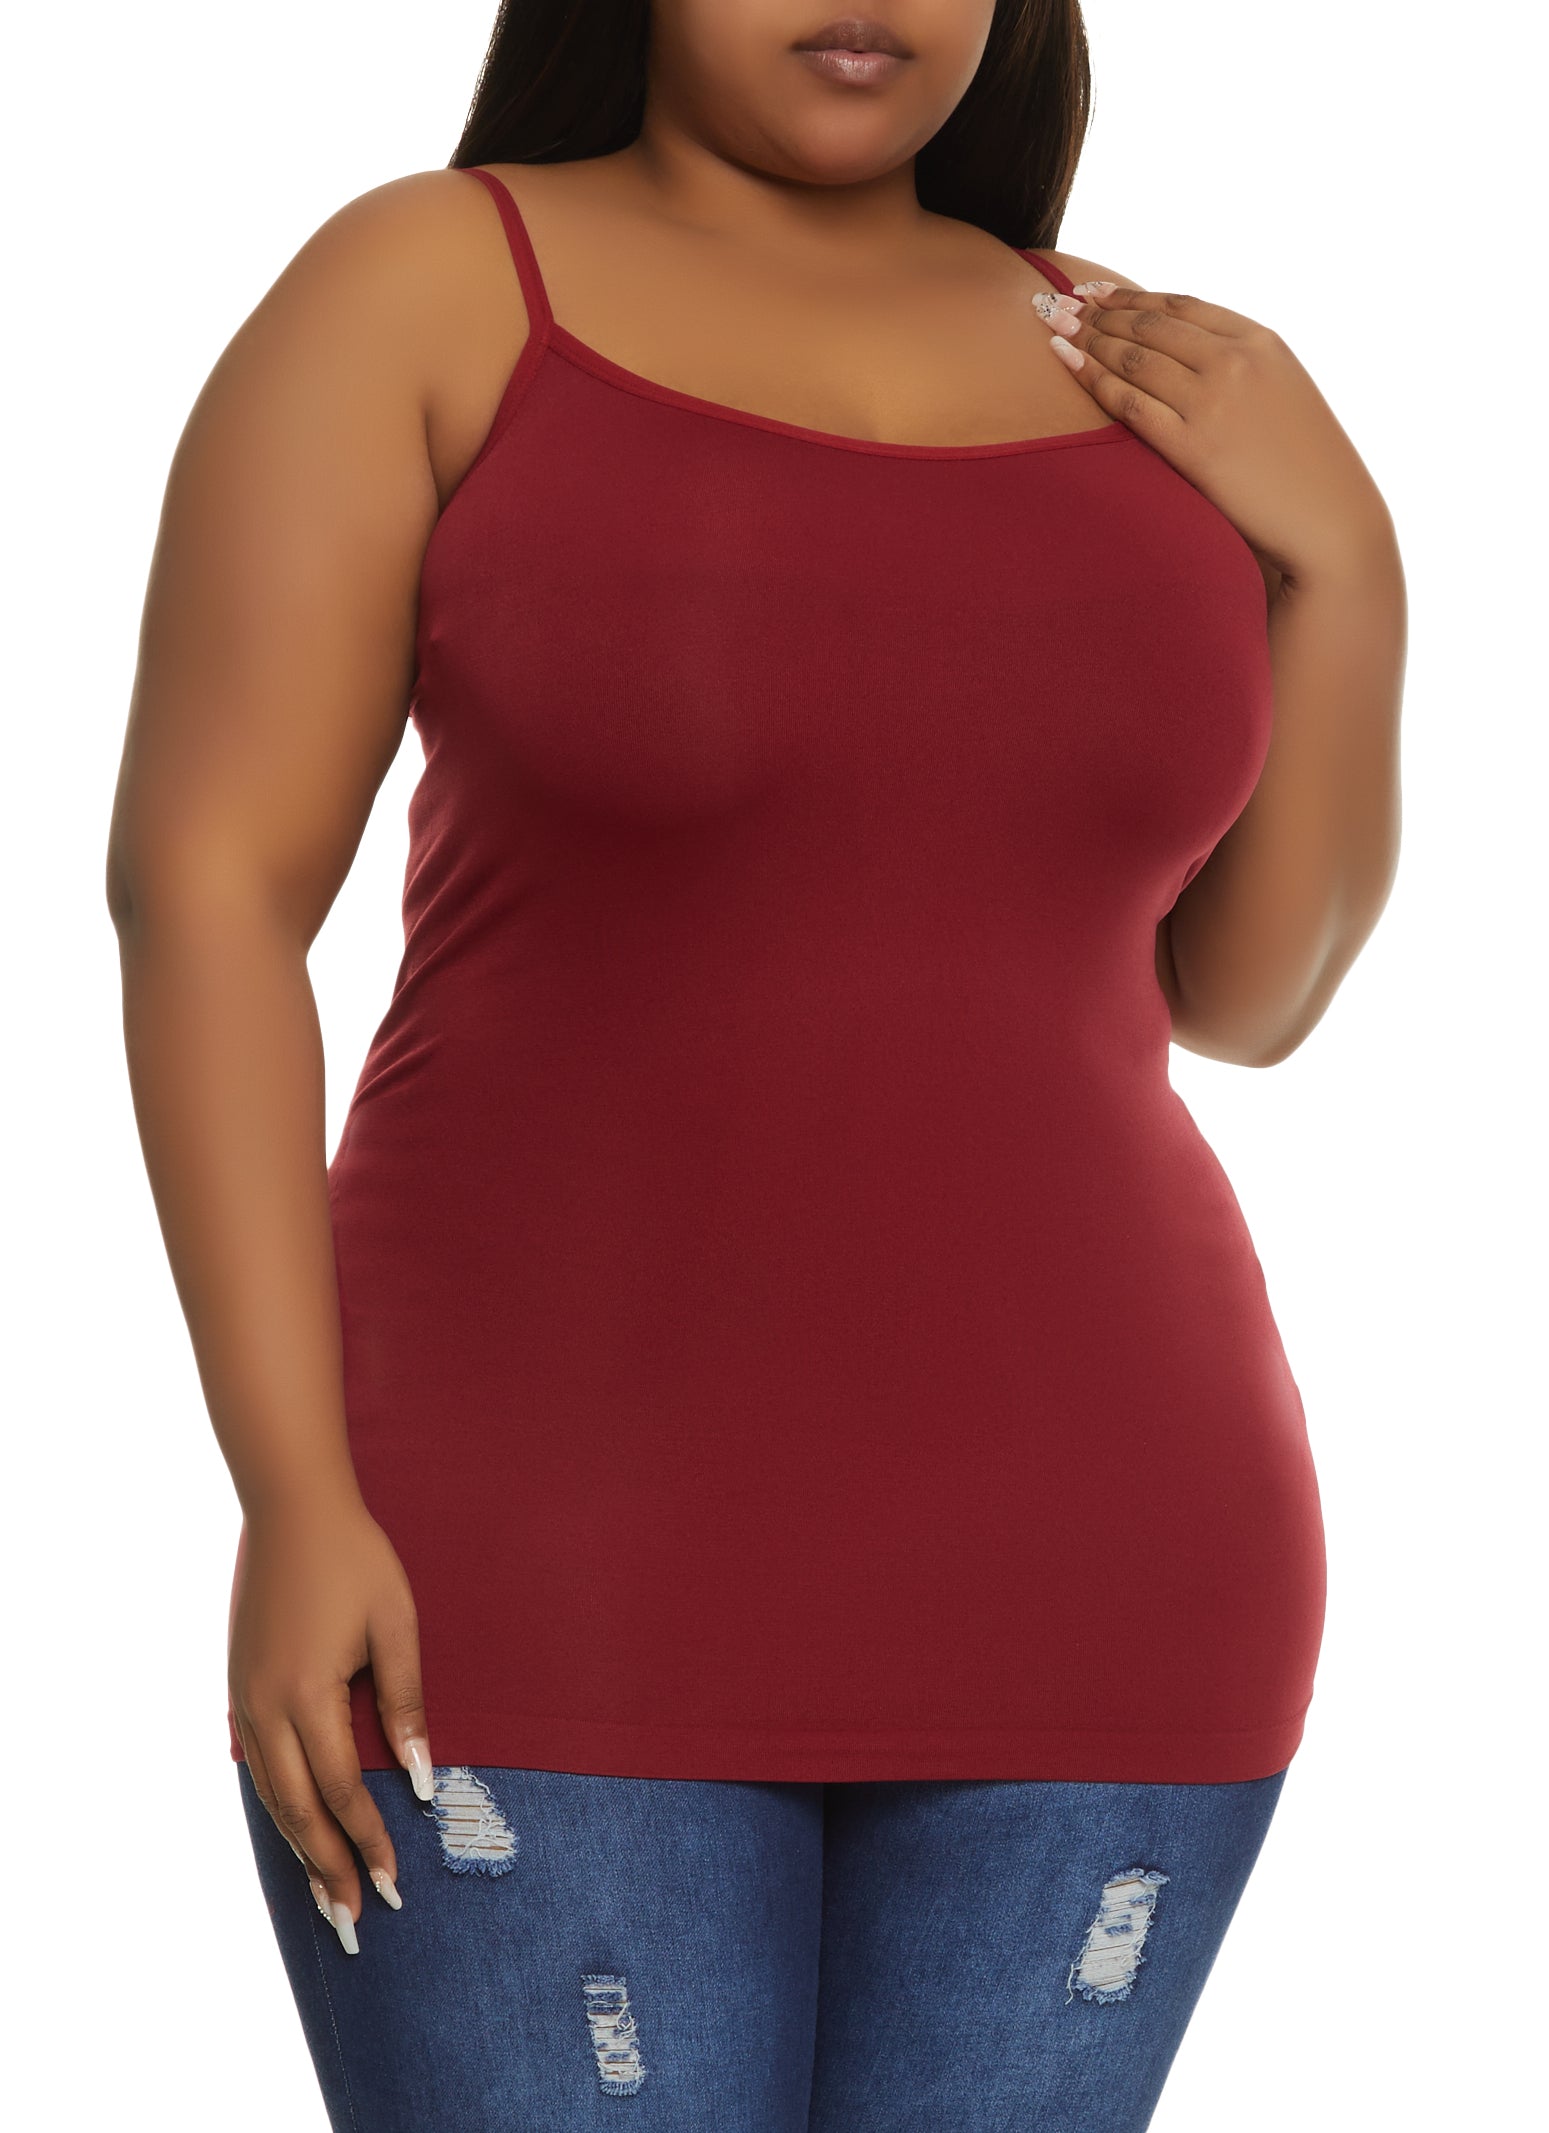 Burgundy Plus Size Clothing, Everyday Low Prices